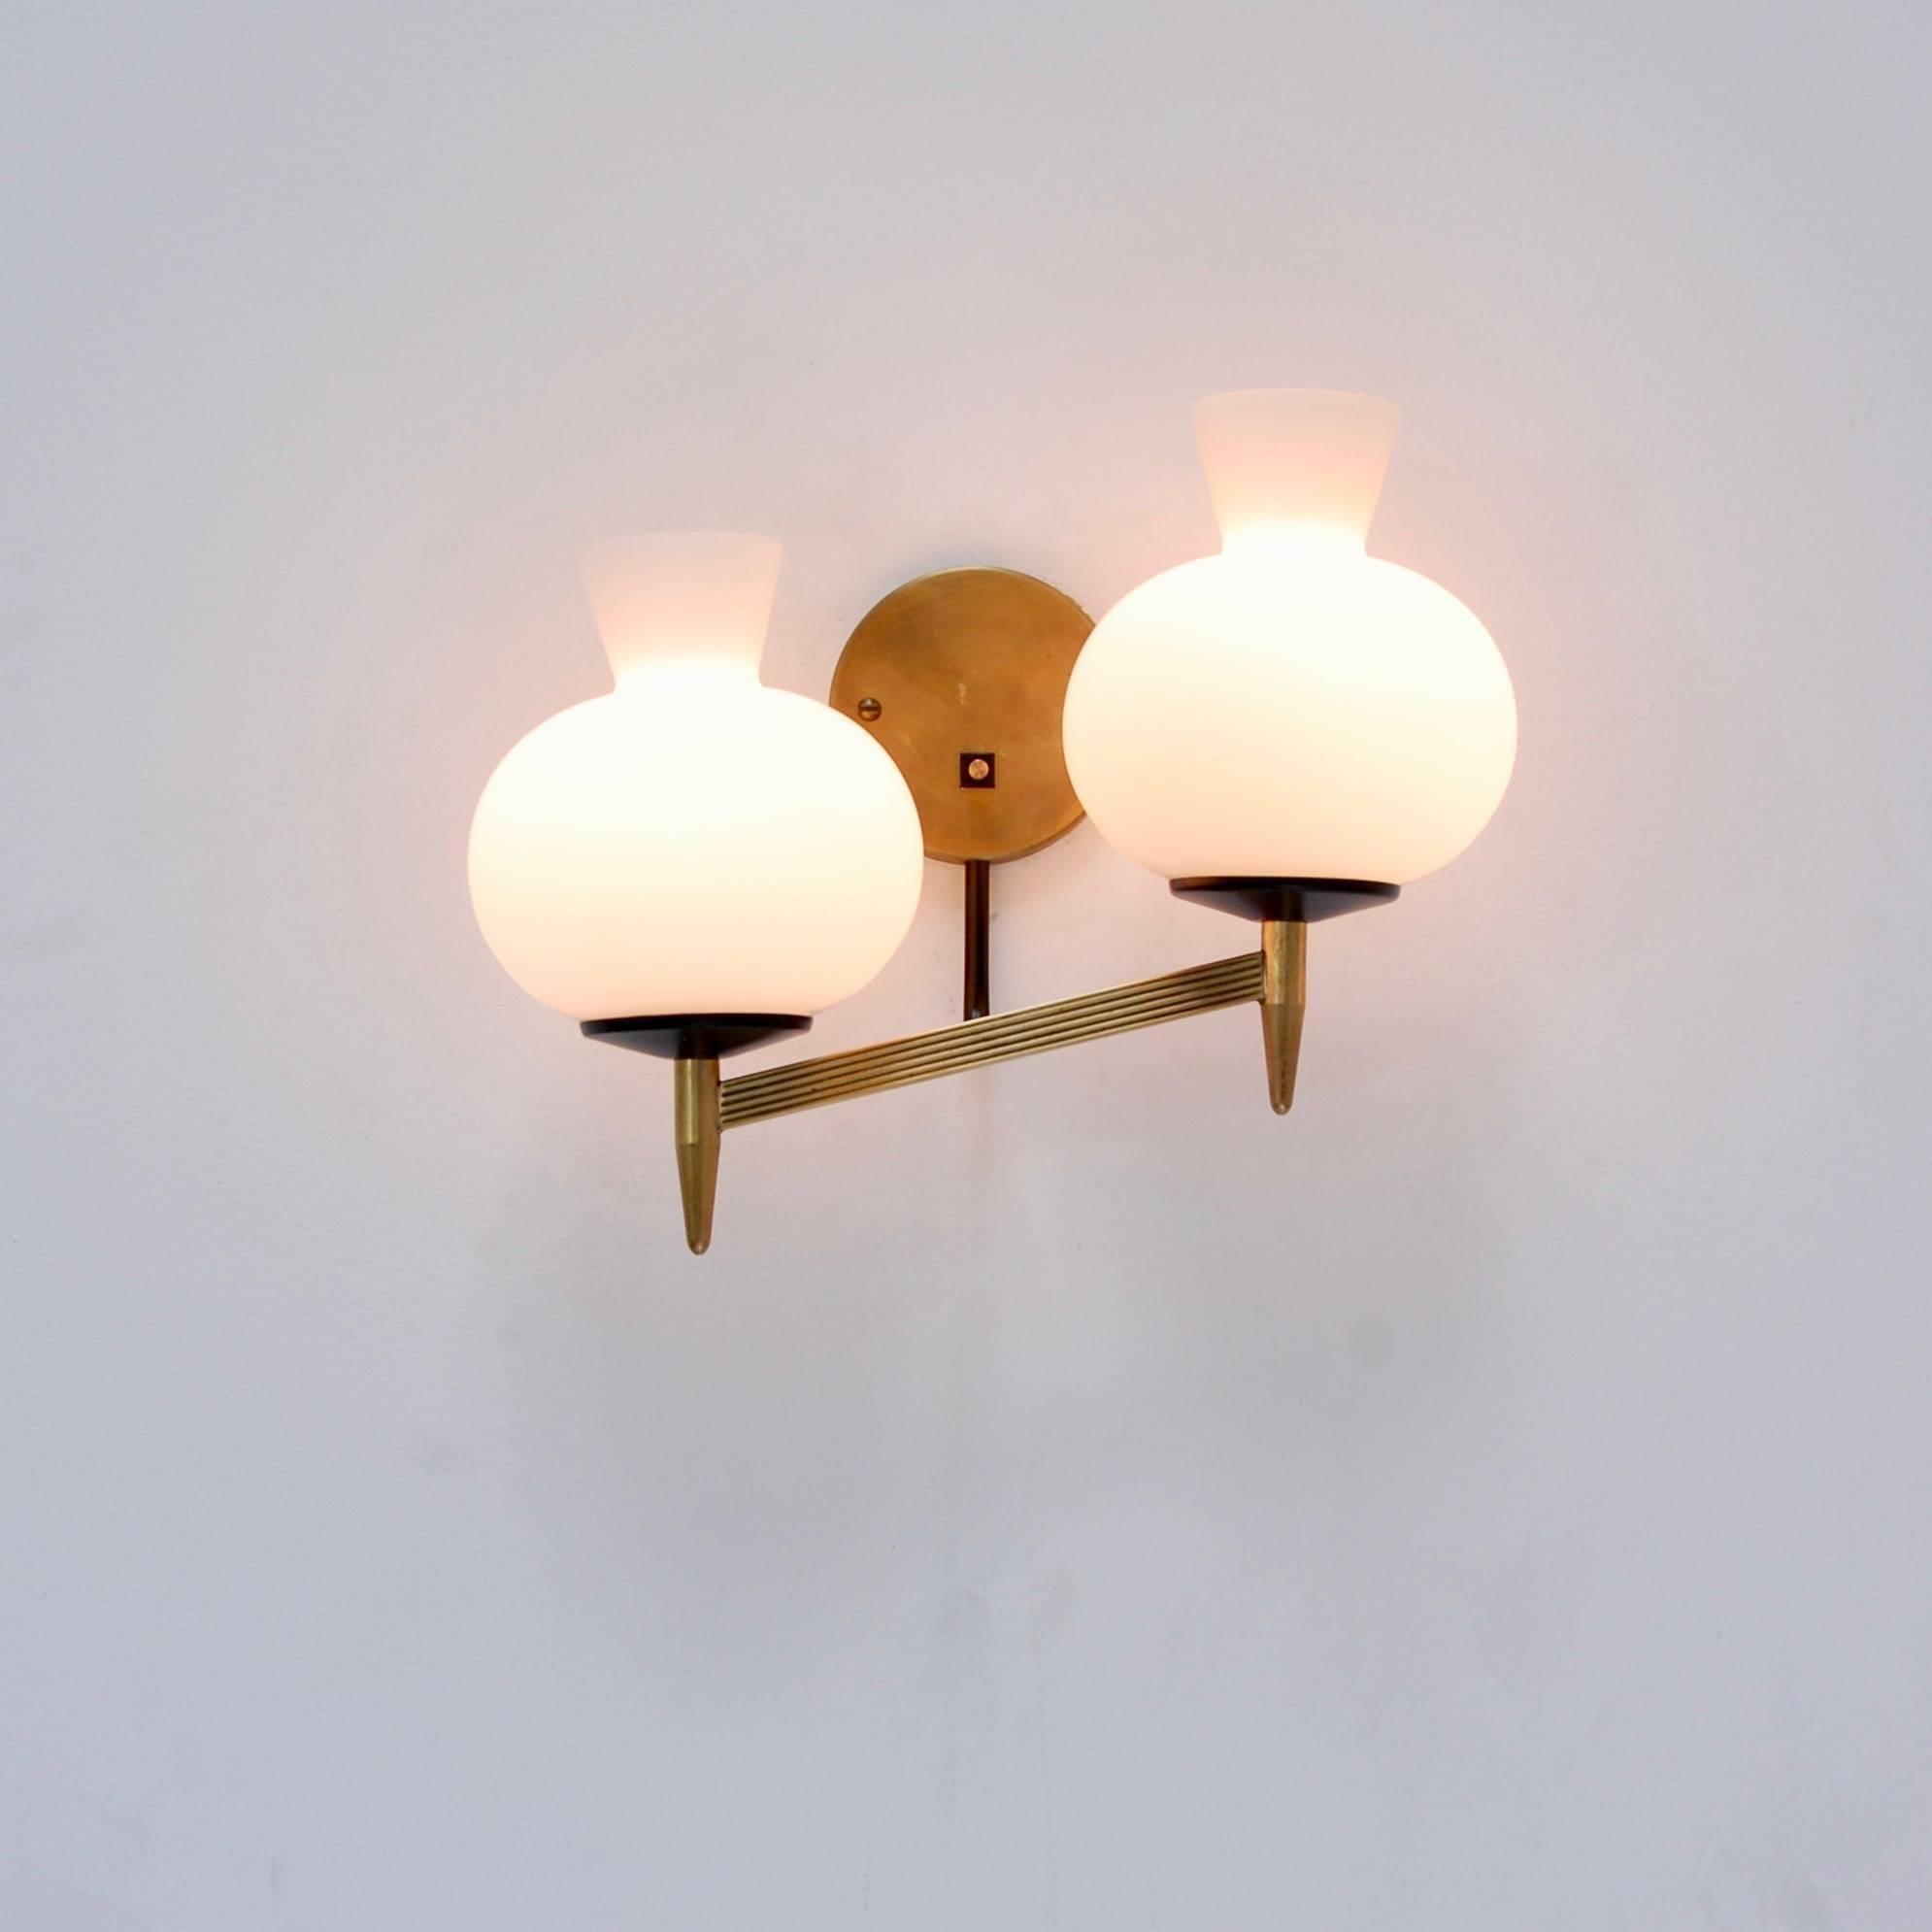 Four double shade sconces from 1950s Italy in glass, brass and steel. Partially restored. Currently wired for use in the US. Priced individually.
Measurements:
Height 10”
Depth 7”
Width 12”.
  